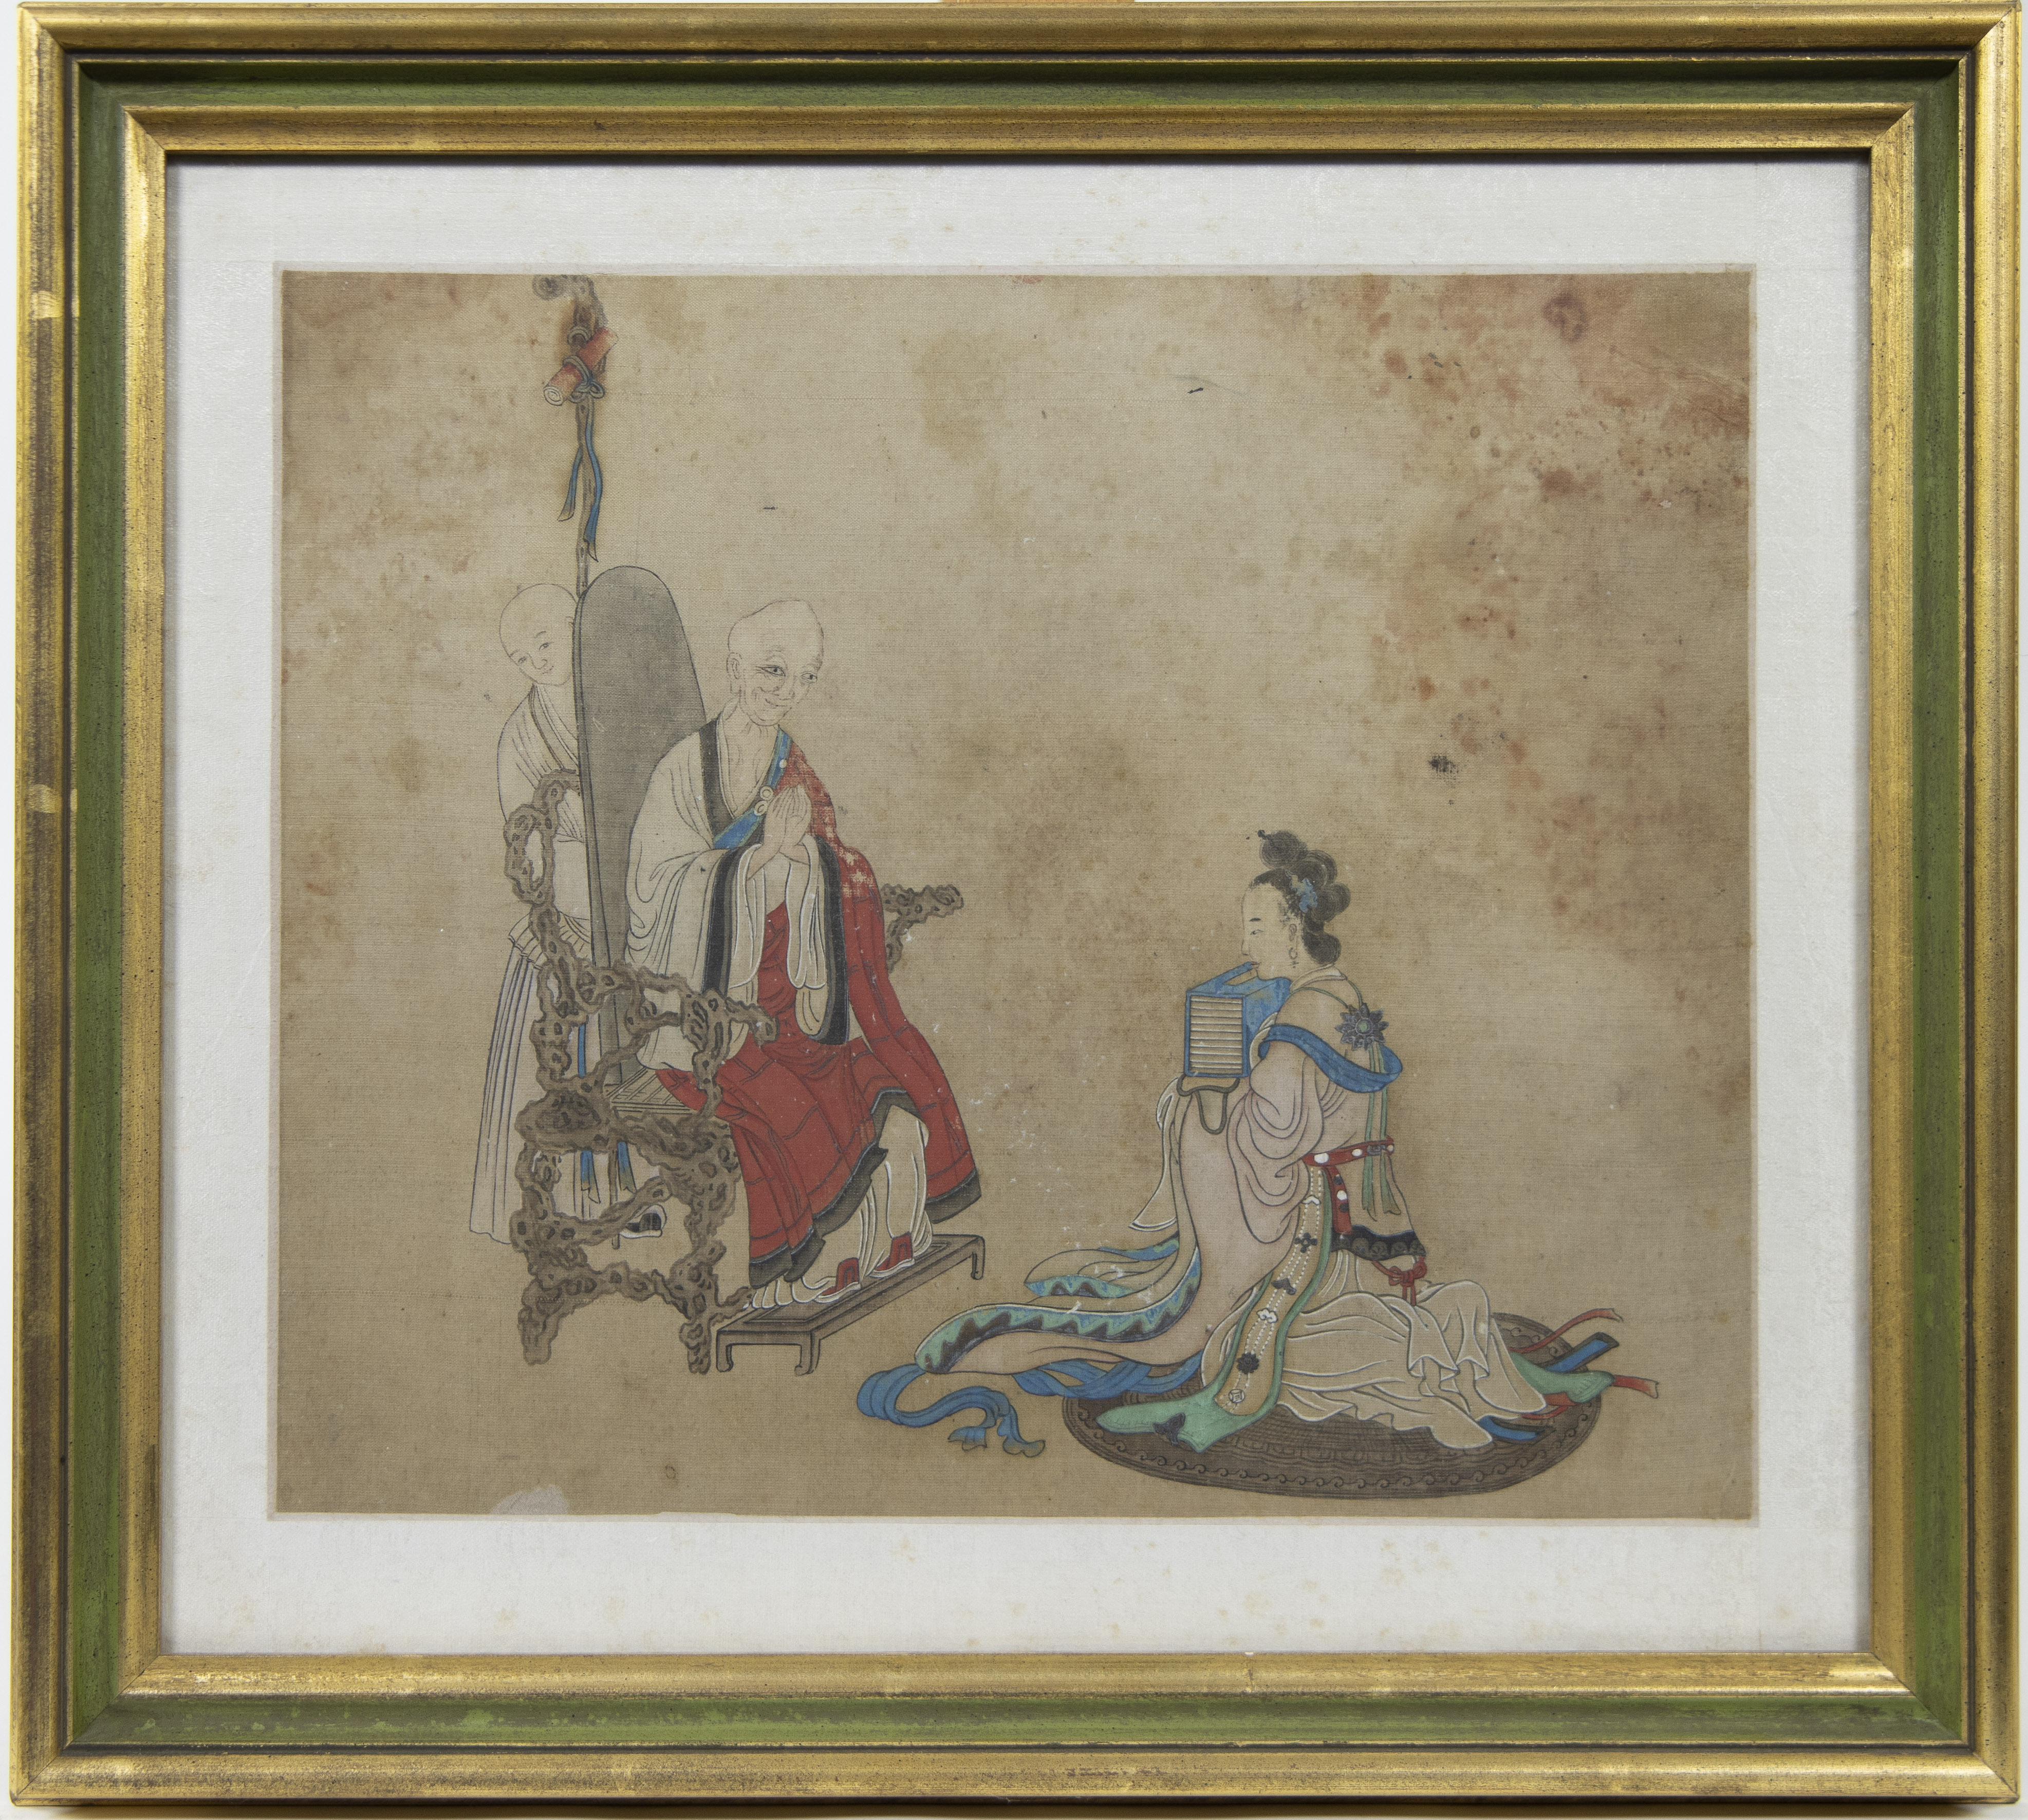 Set of 13 Chinese coloured drawings on silk, 19th century, some are signed - Image 13 of 17